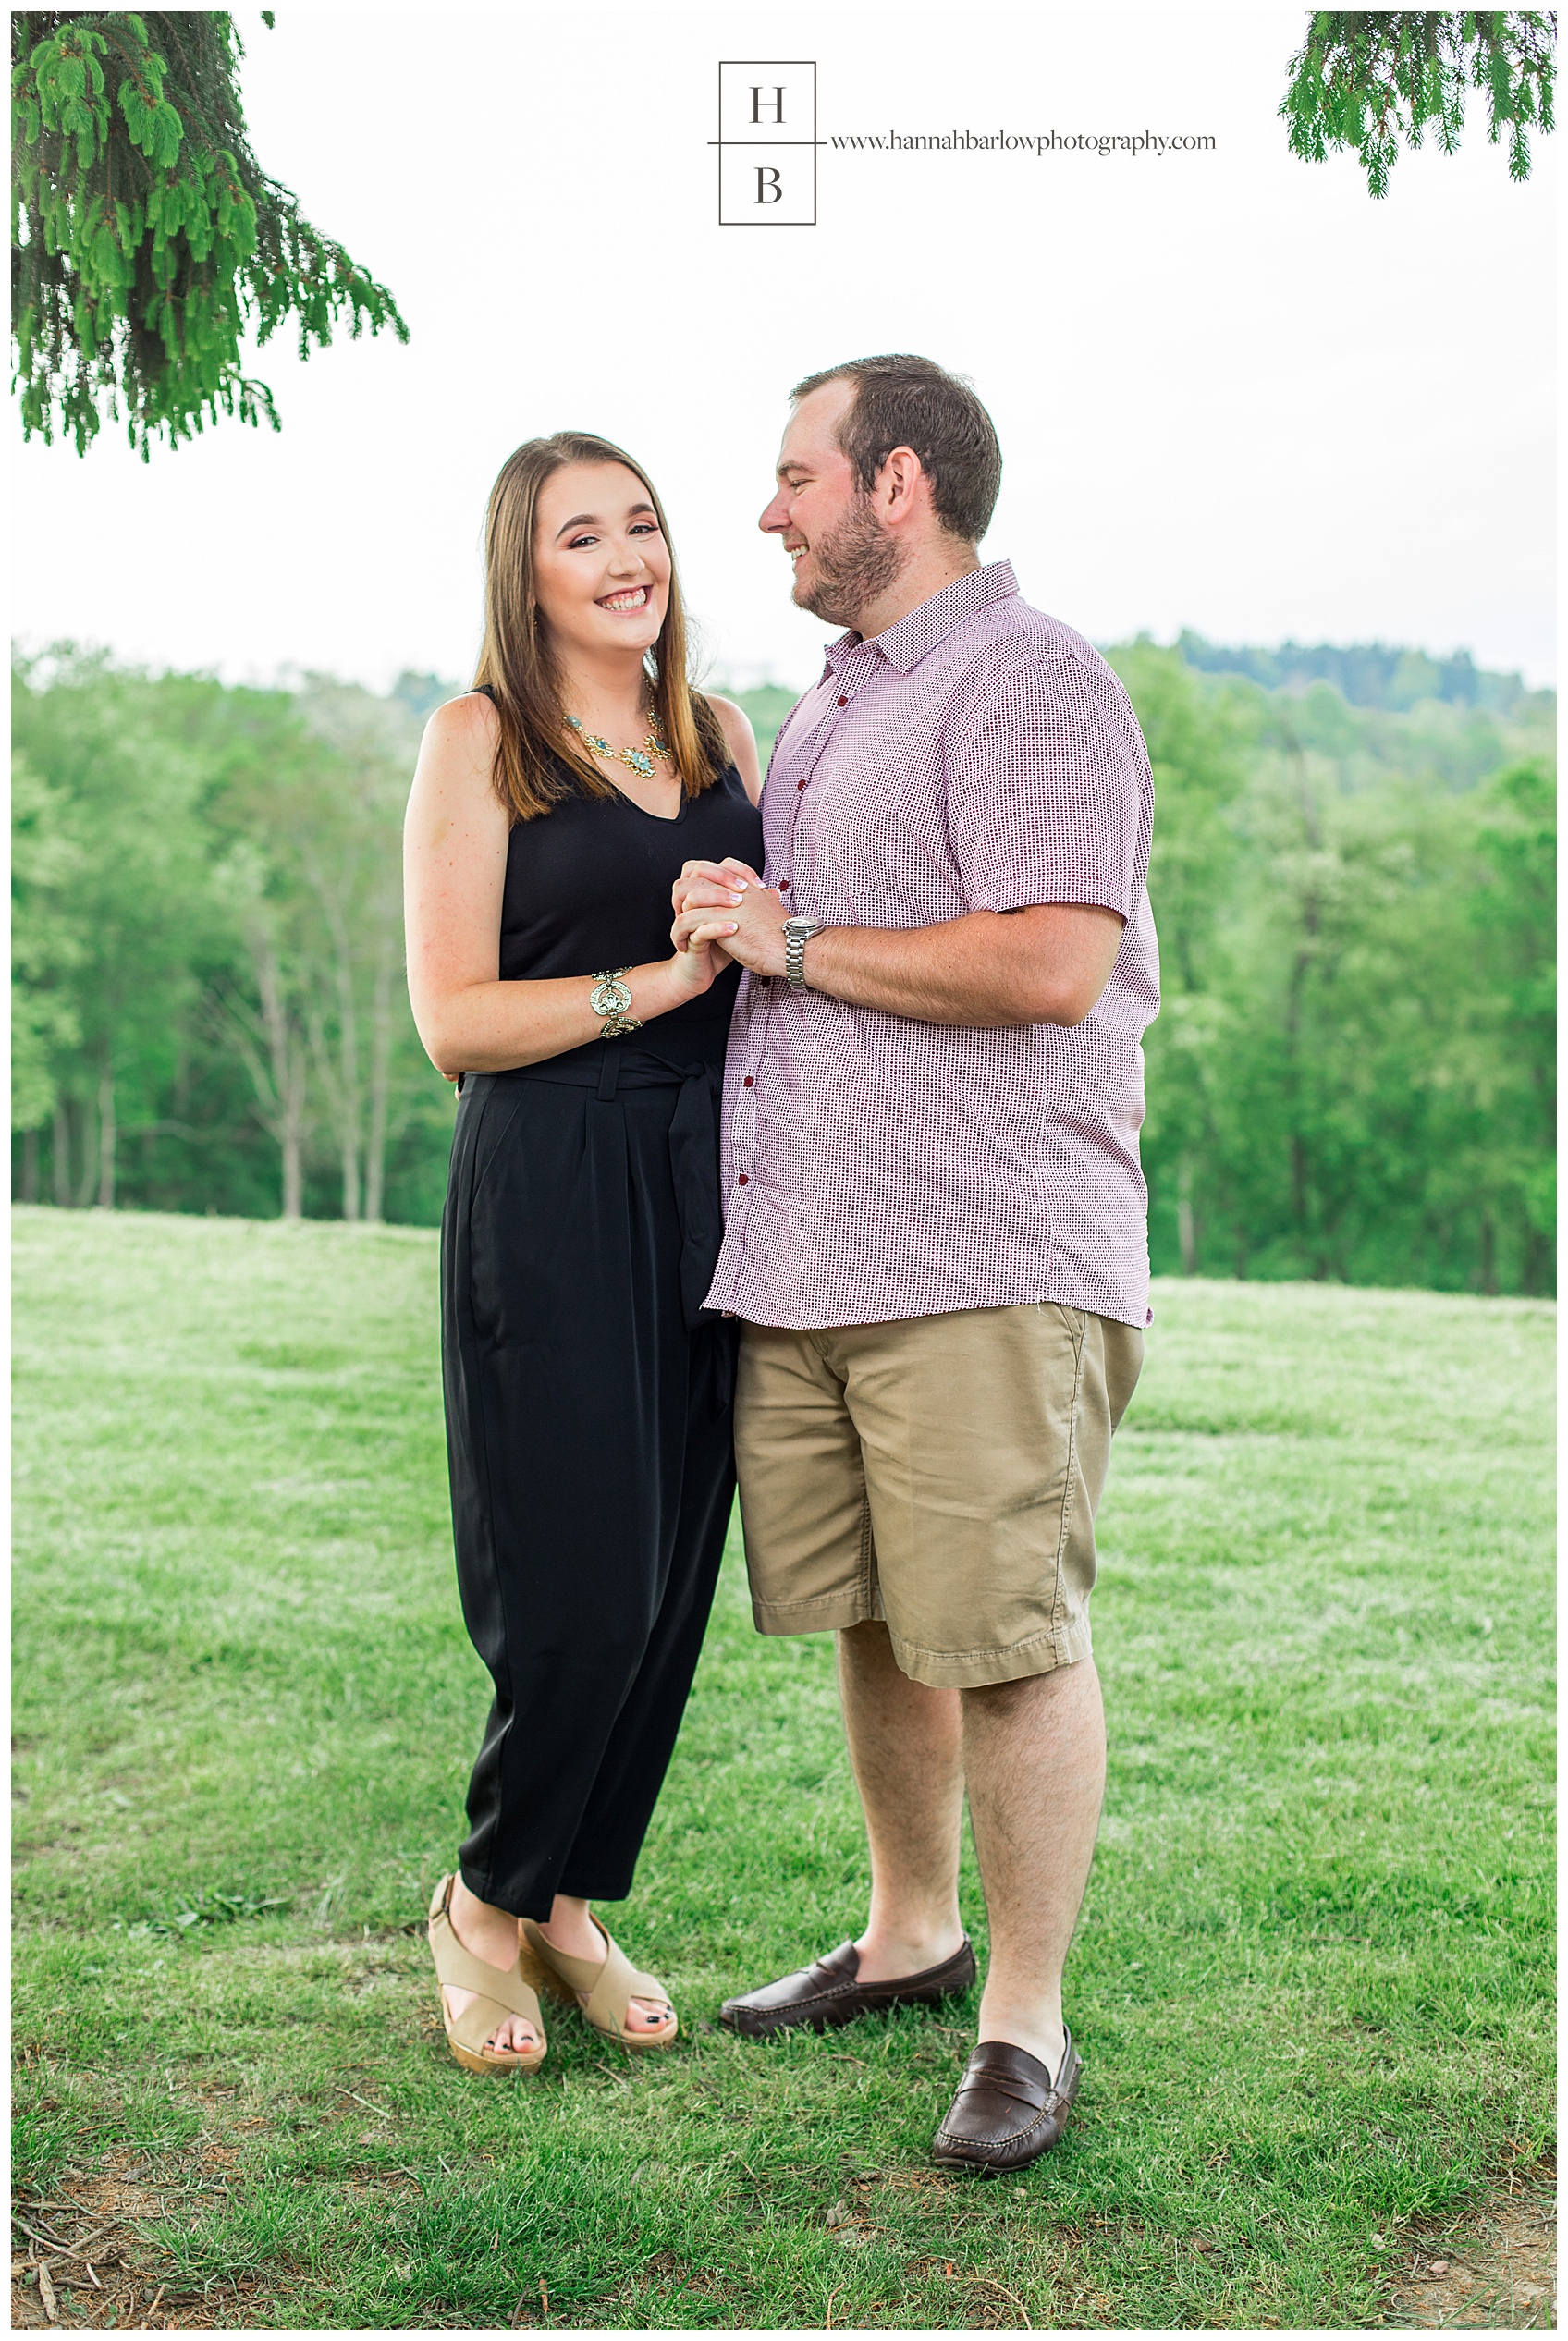 Engagement Photo in Wellsburg West Virginia under a tree at Brooke Hills Park